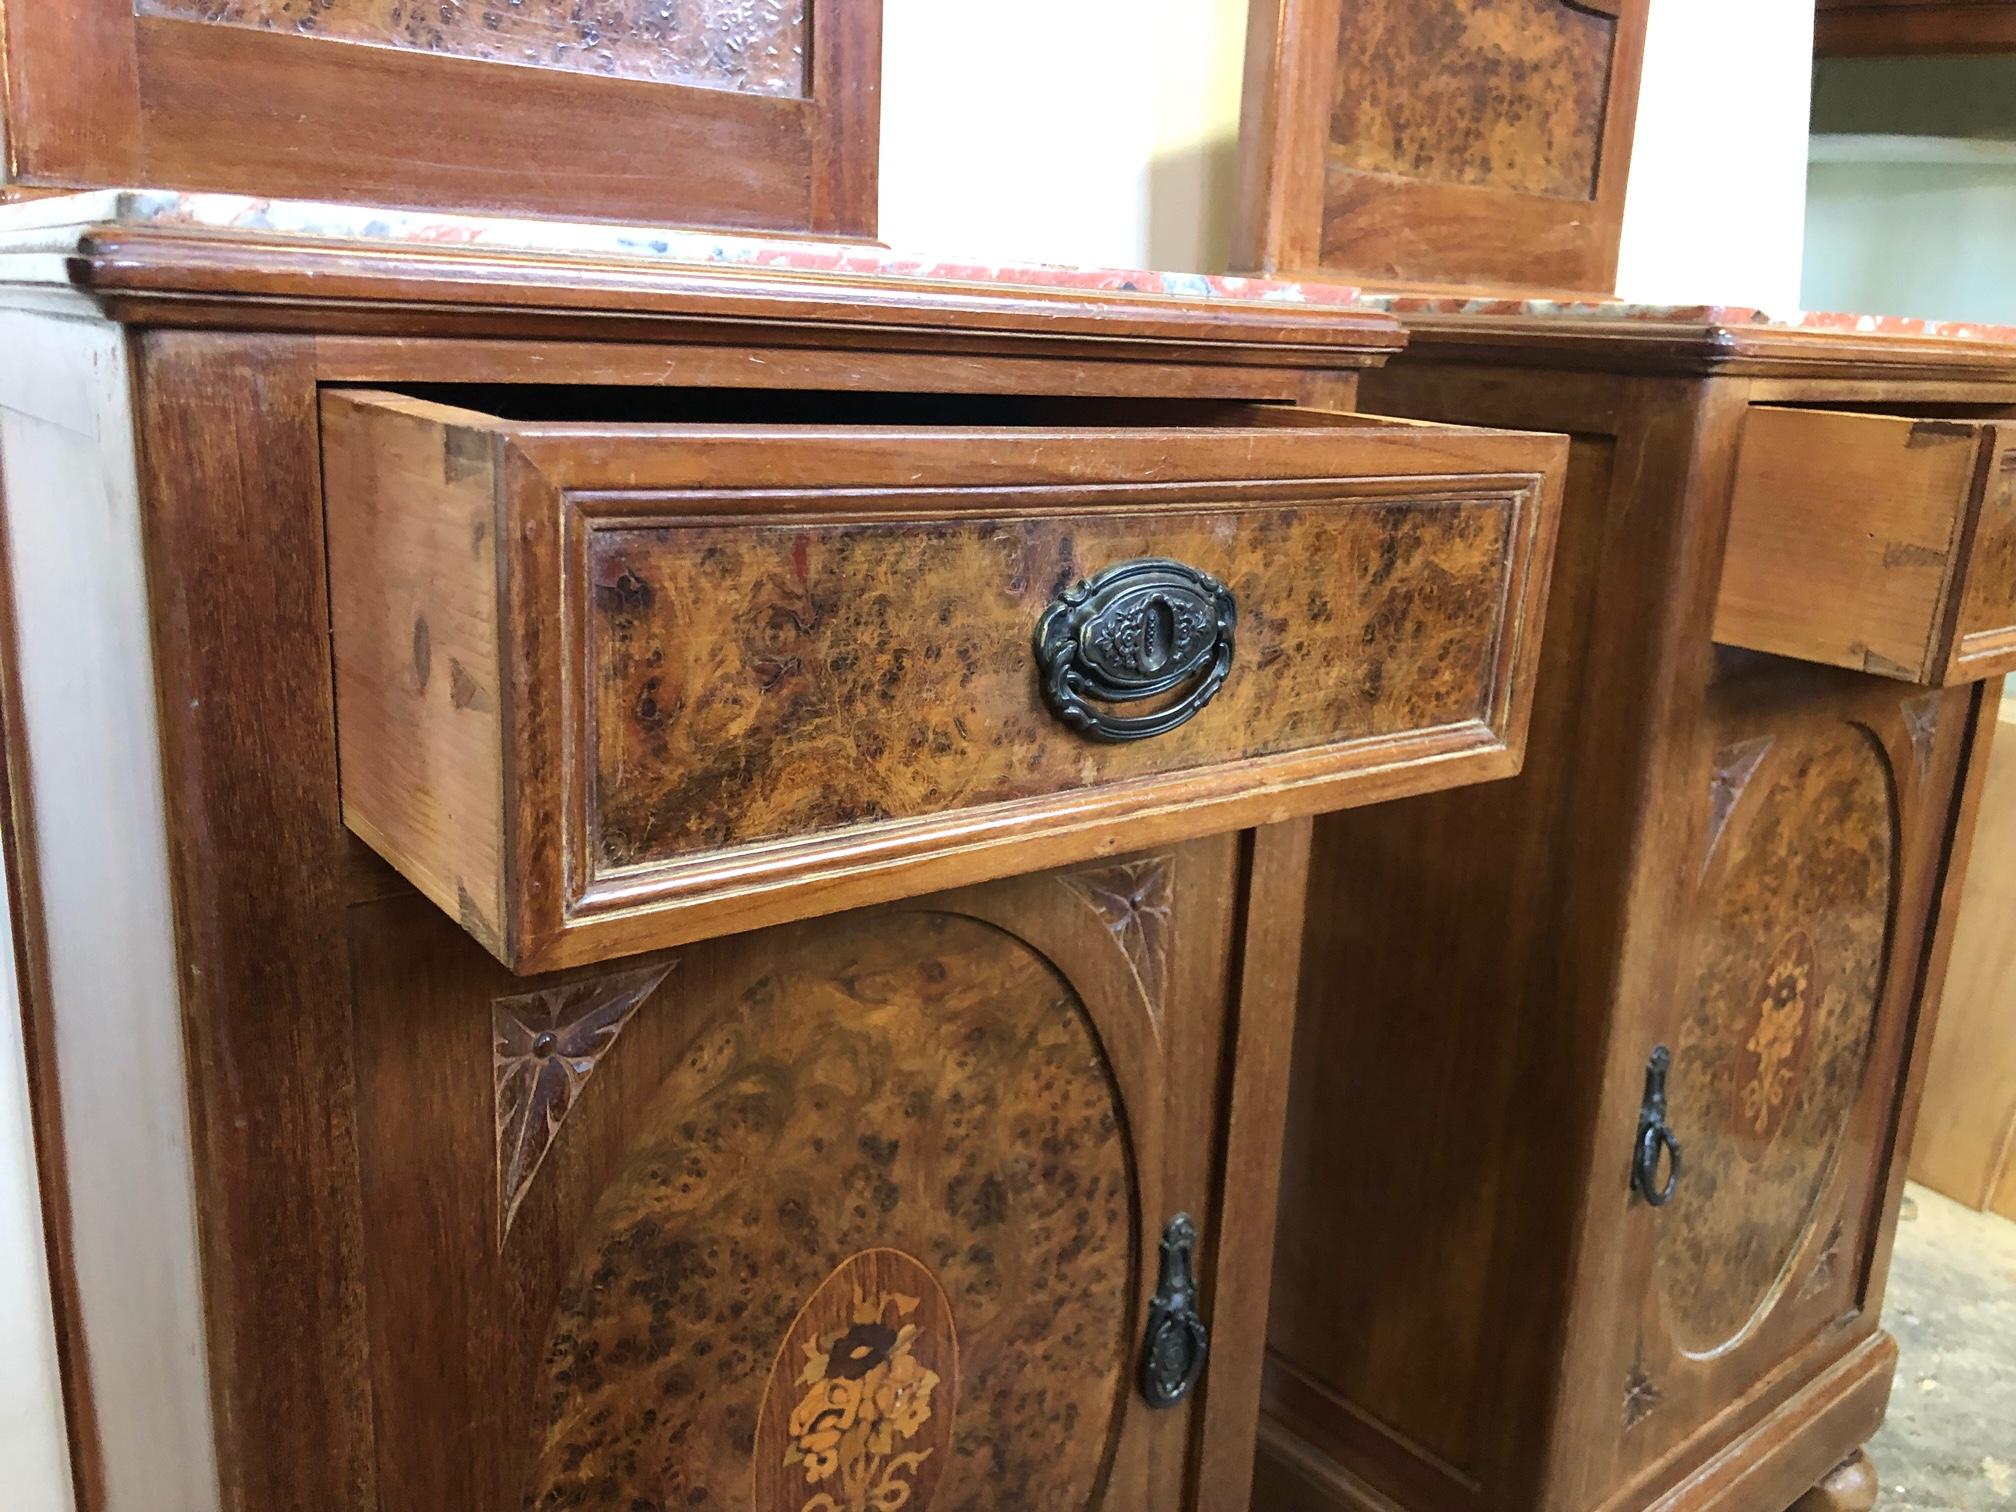 Pair of original 1960 Italian night stands in walnut and with granite marble top. 
All the carvings on the solid walnut parts were done manually.
They have a nice design and are very practical.
Total height with backsplash is 115 cm. The